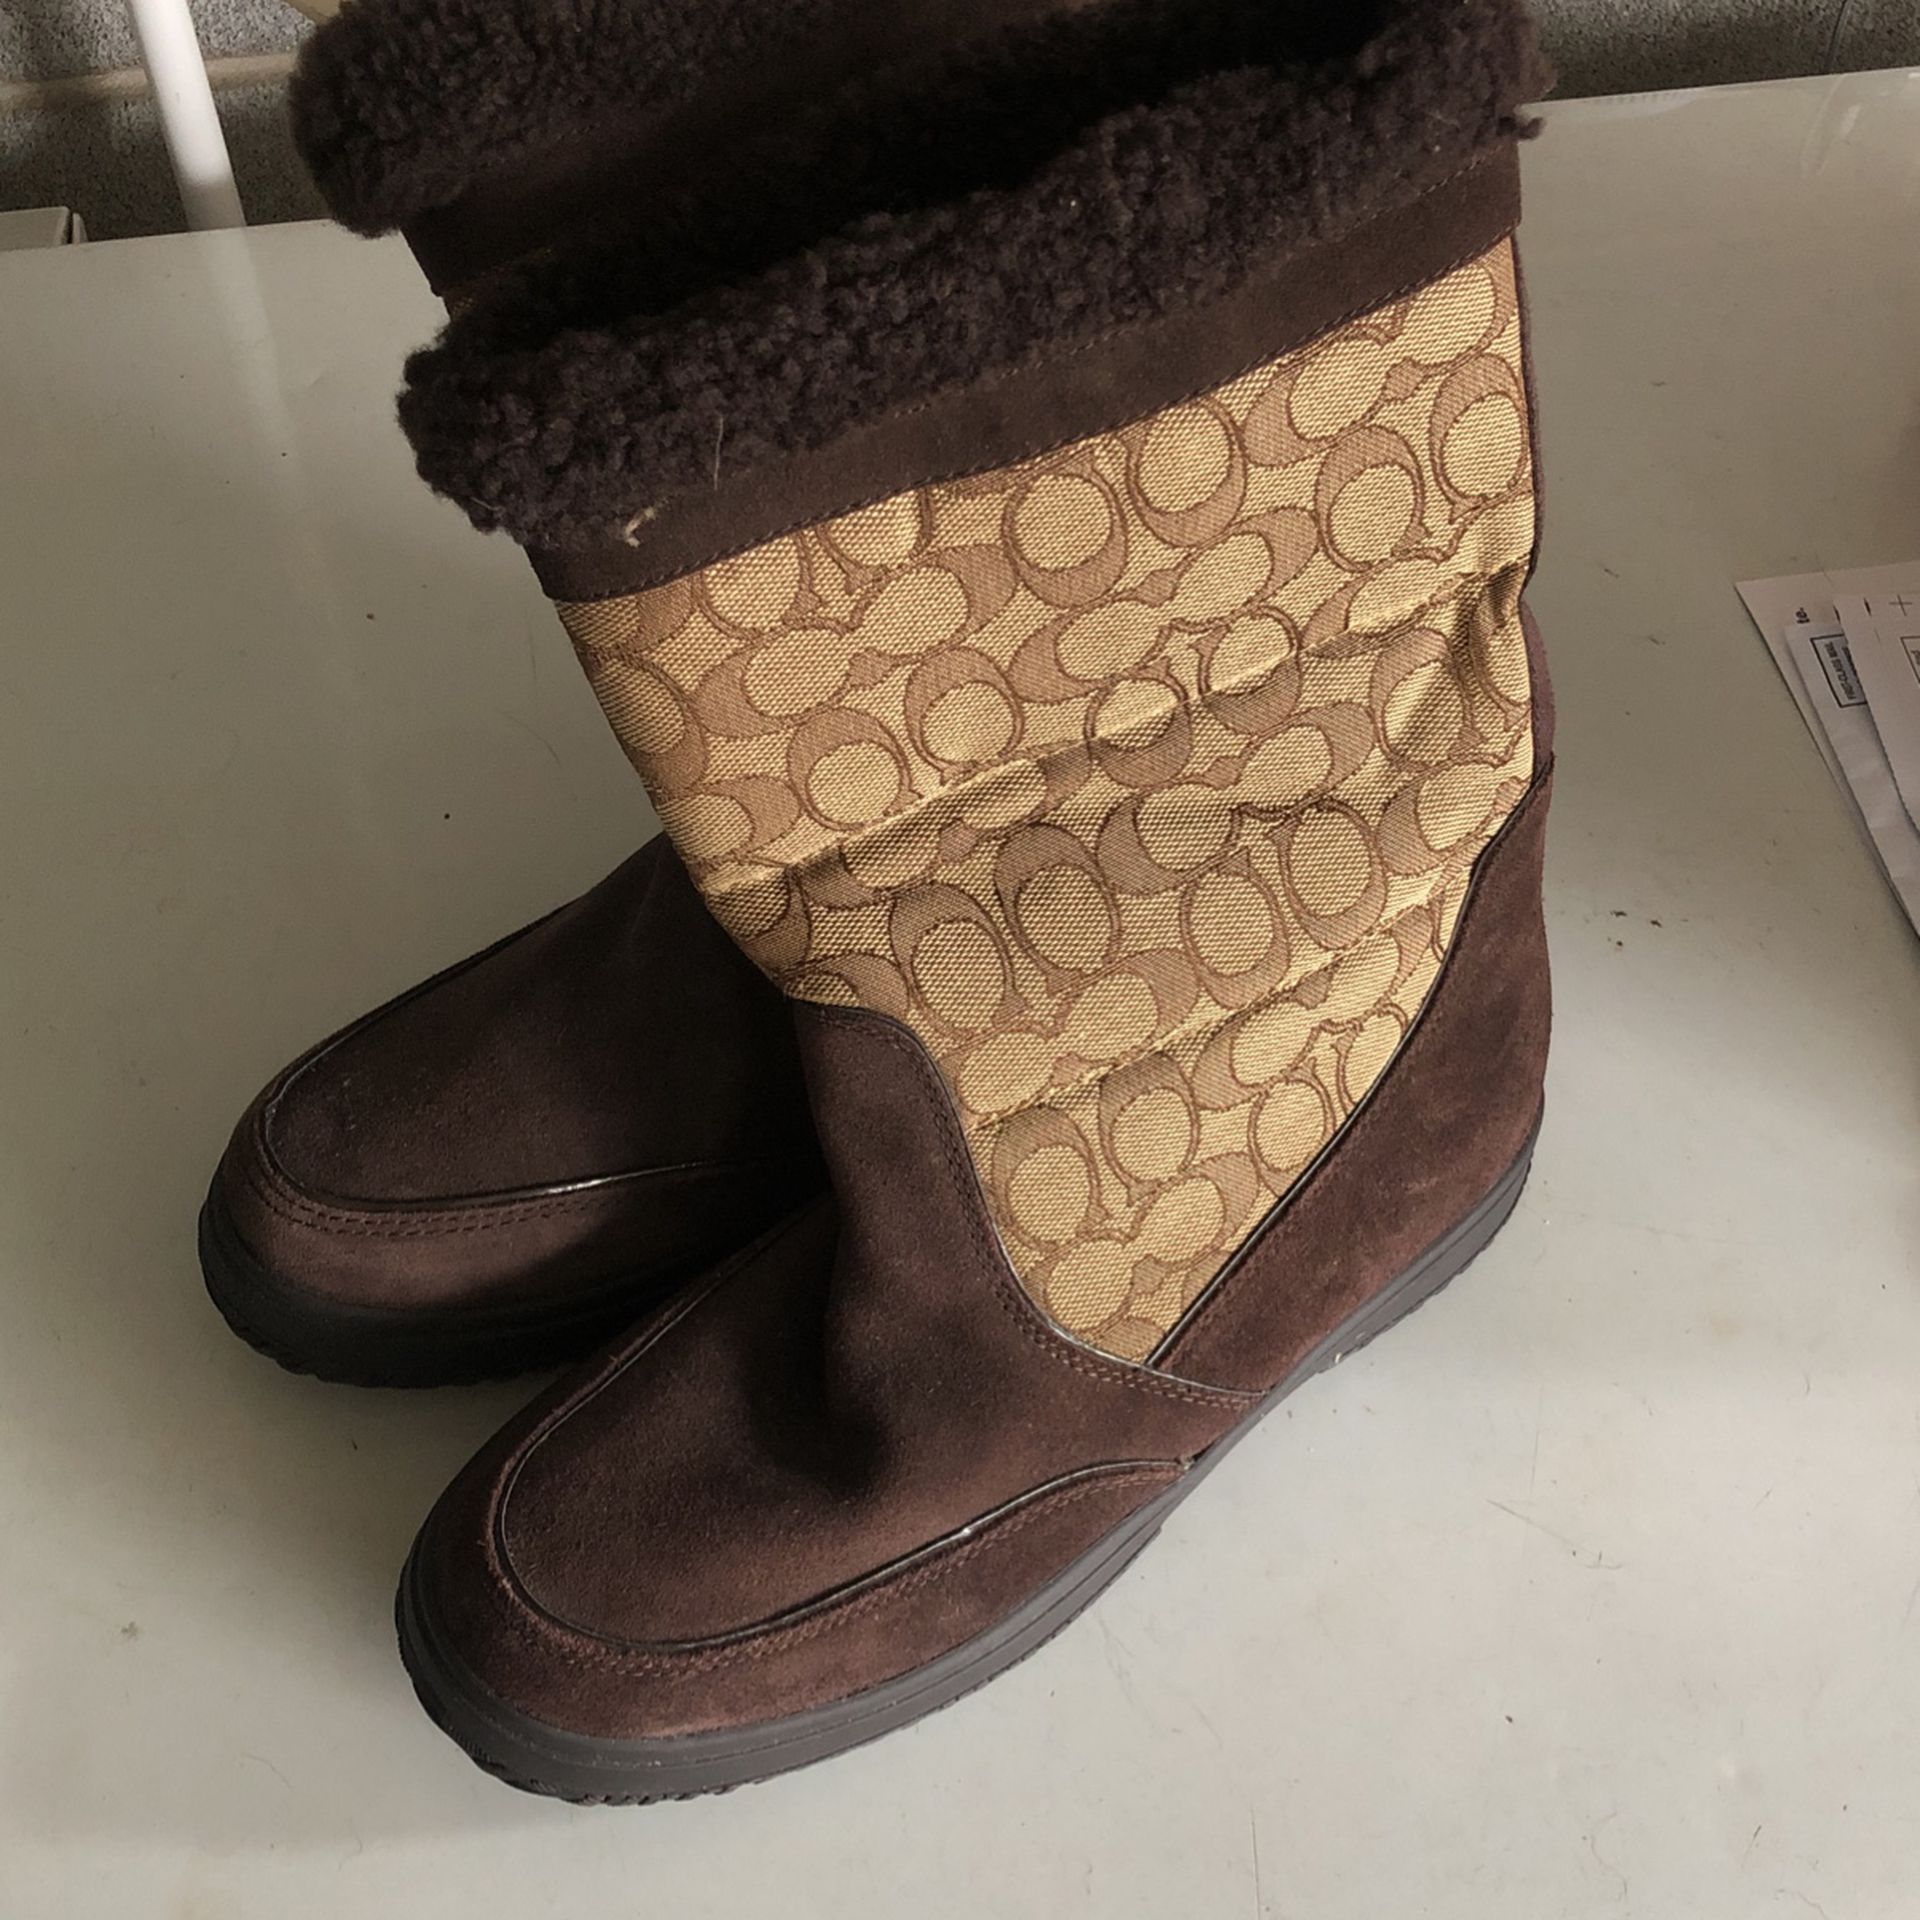 Woman’s Coach Winter Boots Size 9b 